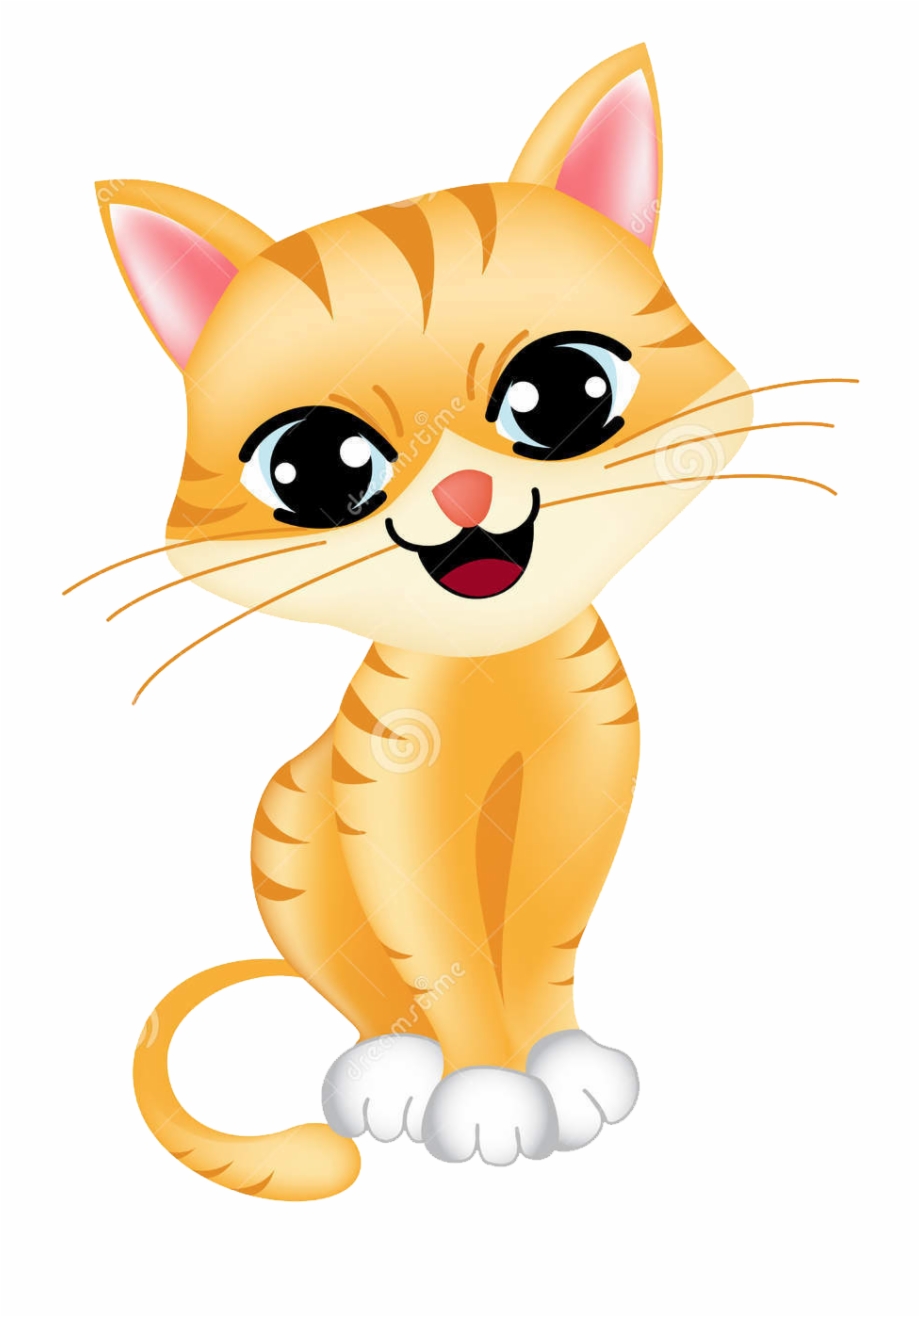 Free Cat Clipart Png, Download Free Cat Clipart Png png images, Free ...